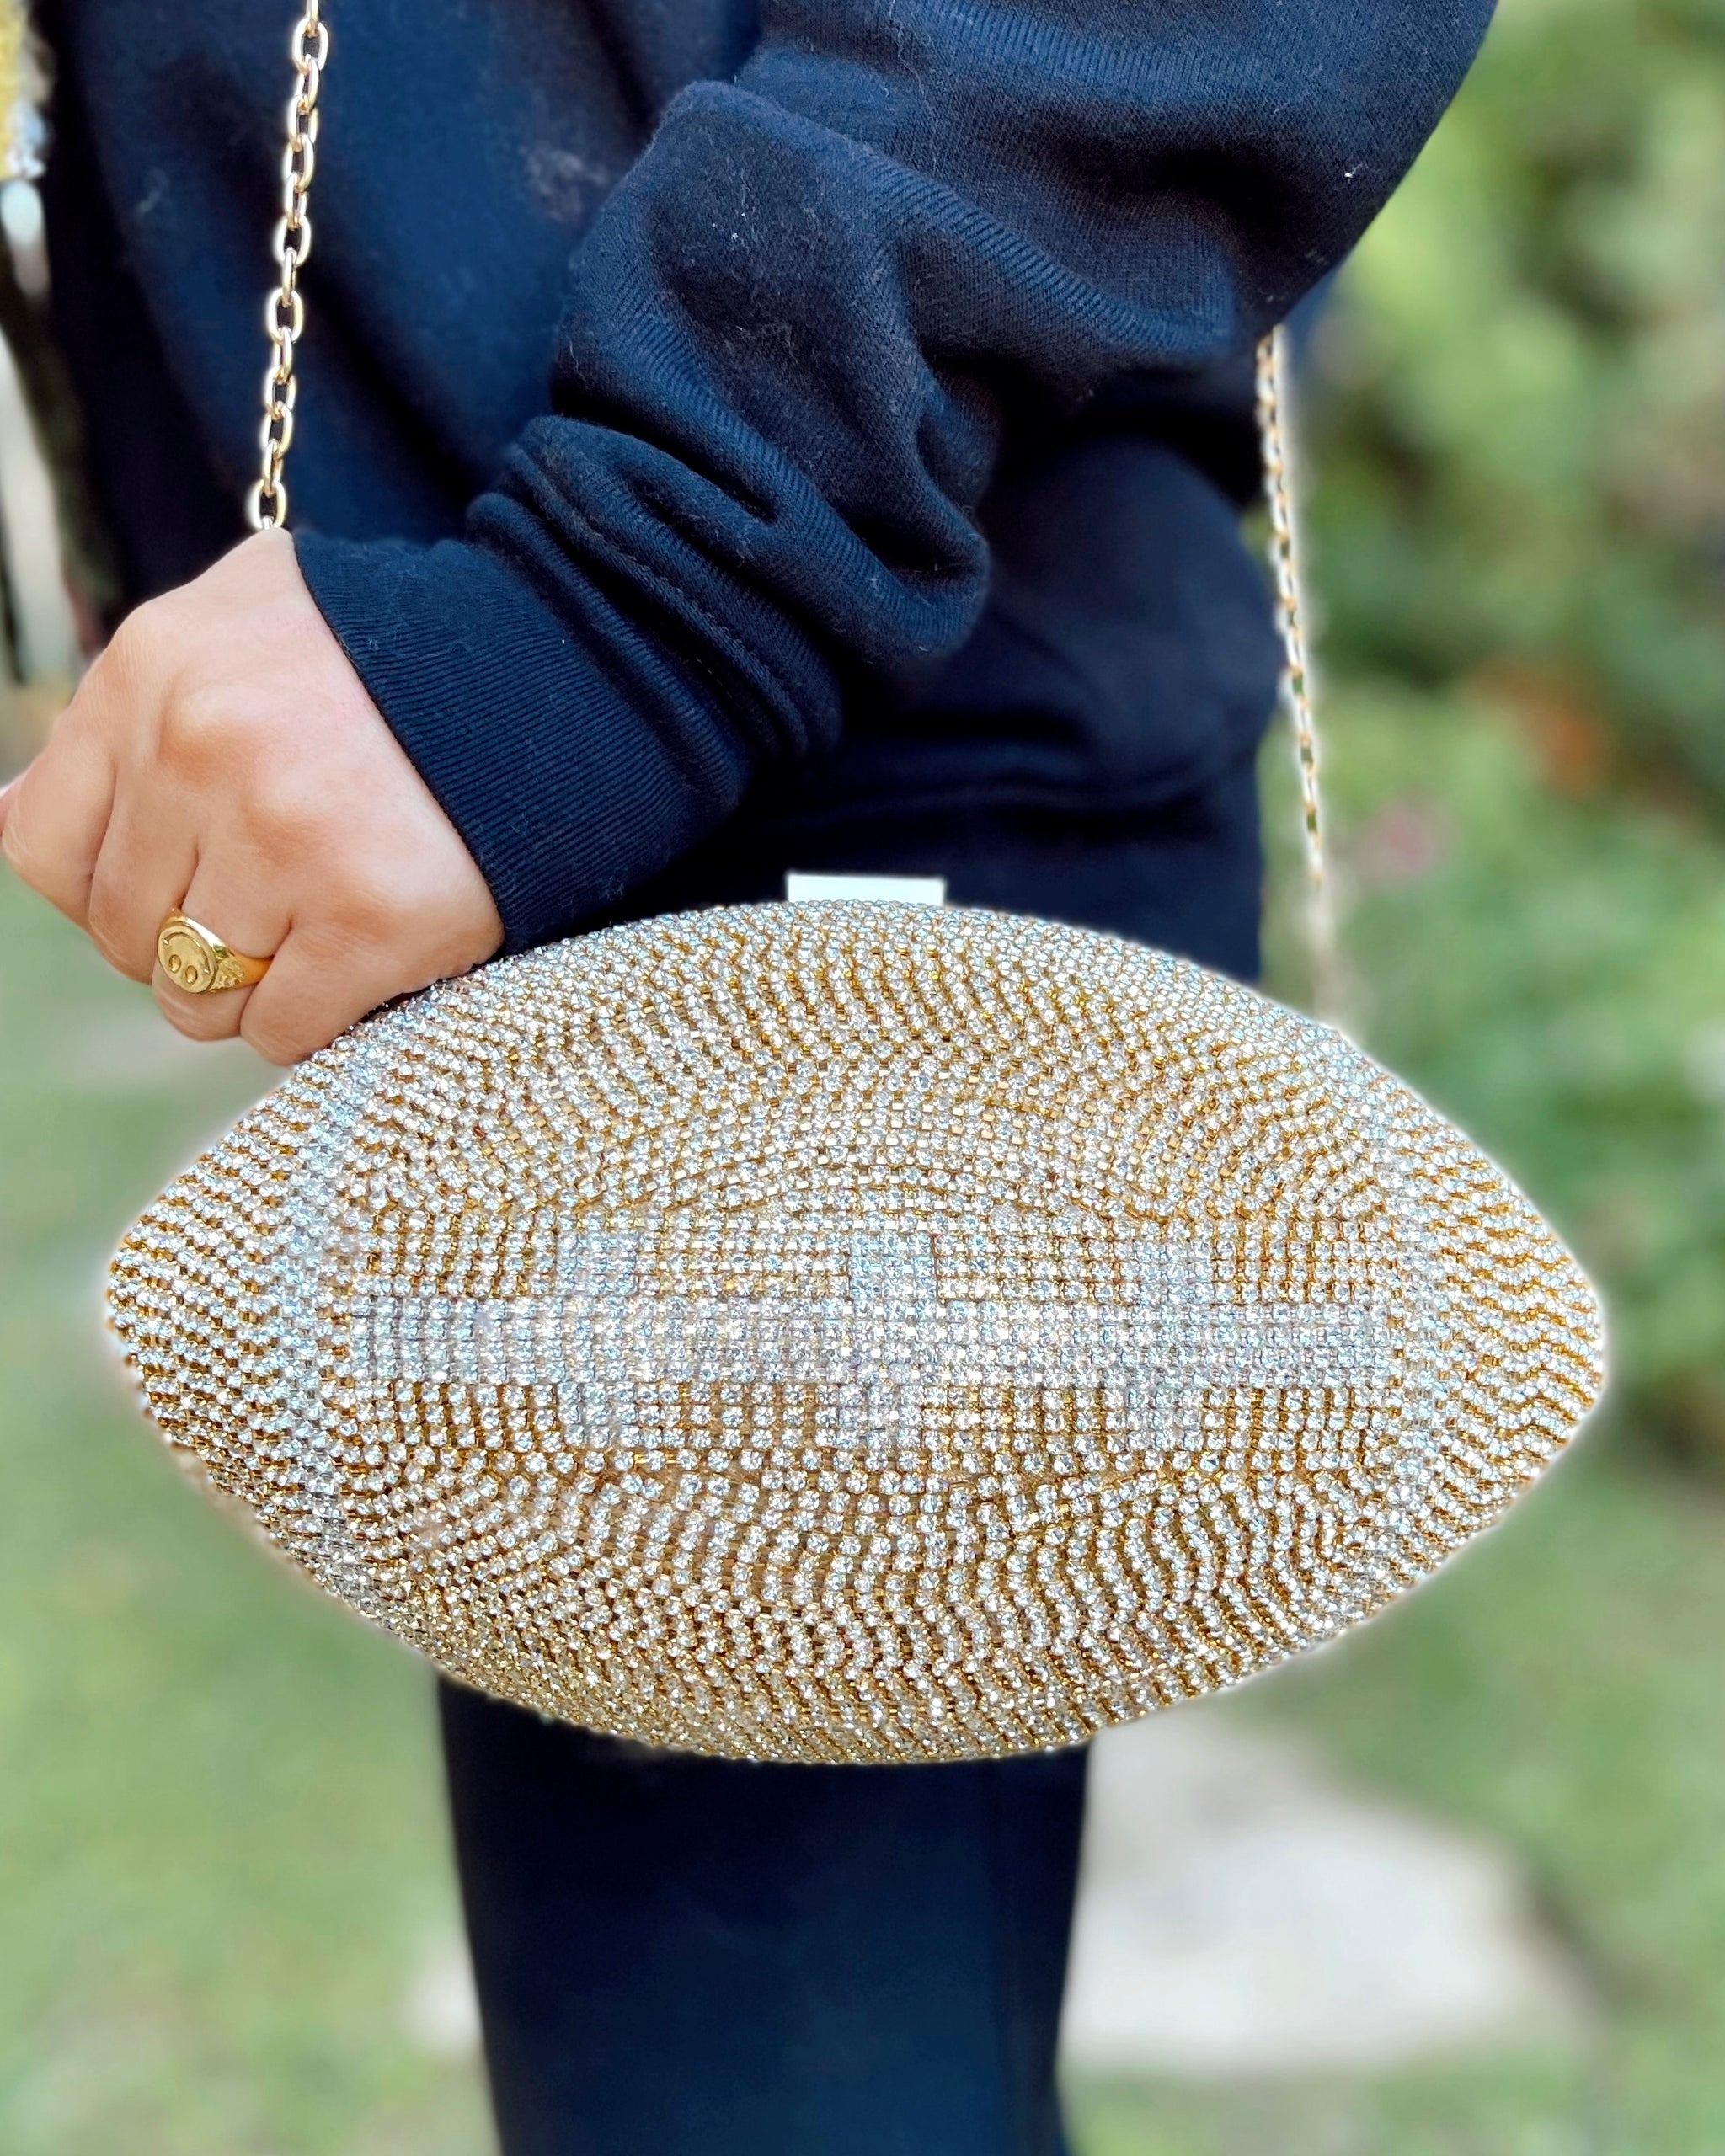 Woman Luxury Football Purse Shoulder Bag Crystal Round Ball Evening Chain  Sling Hand Bags Womens Clutches And Evening Bags249v9205670 From E9in,  $74.41 | DHgate.Com